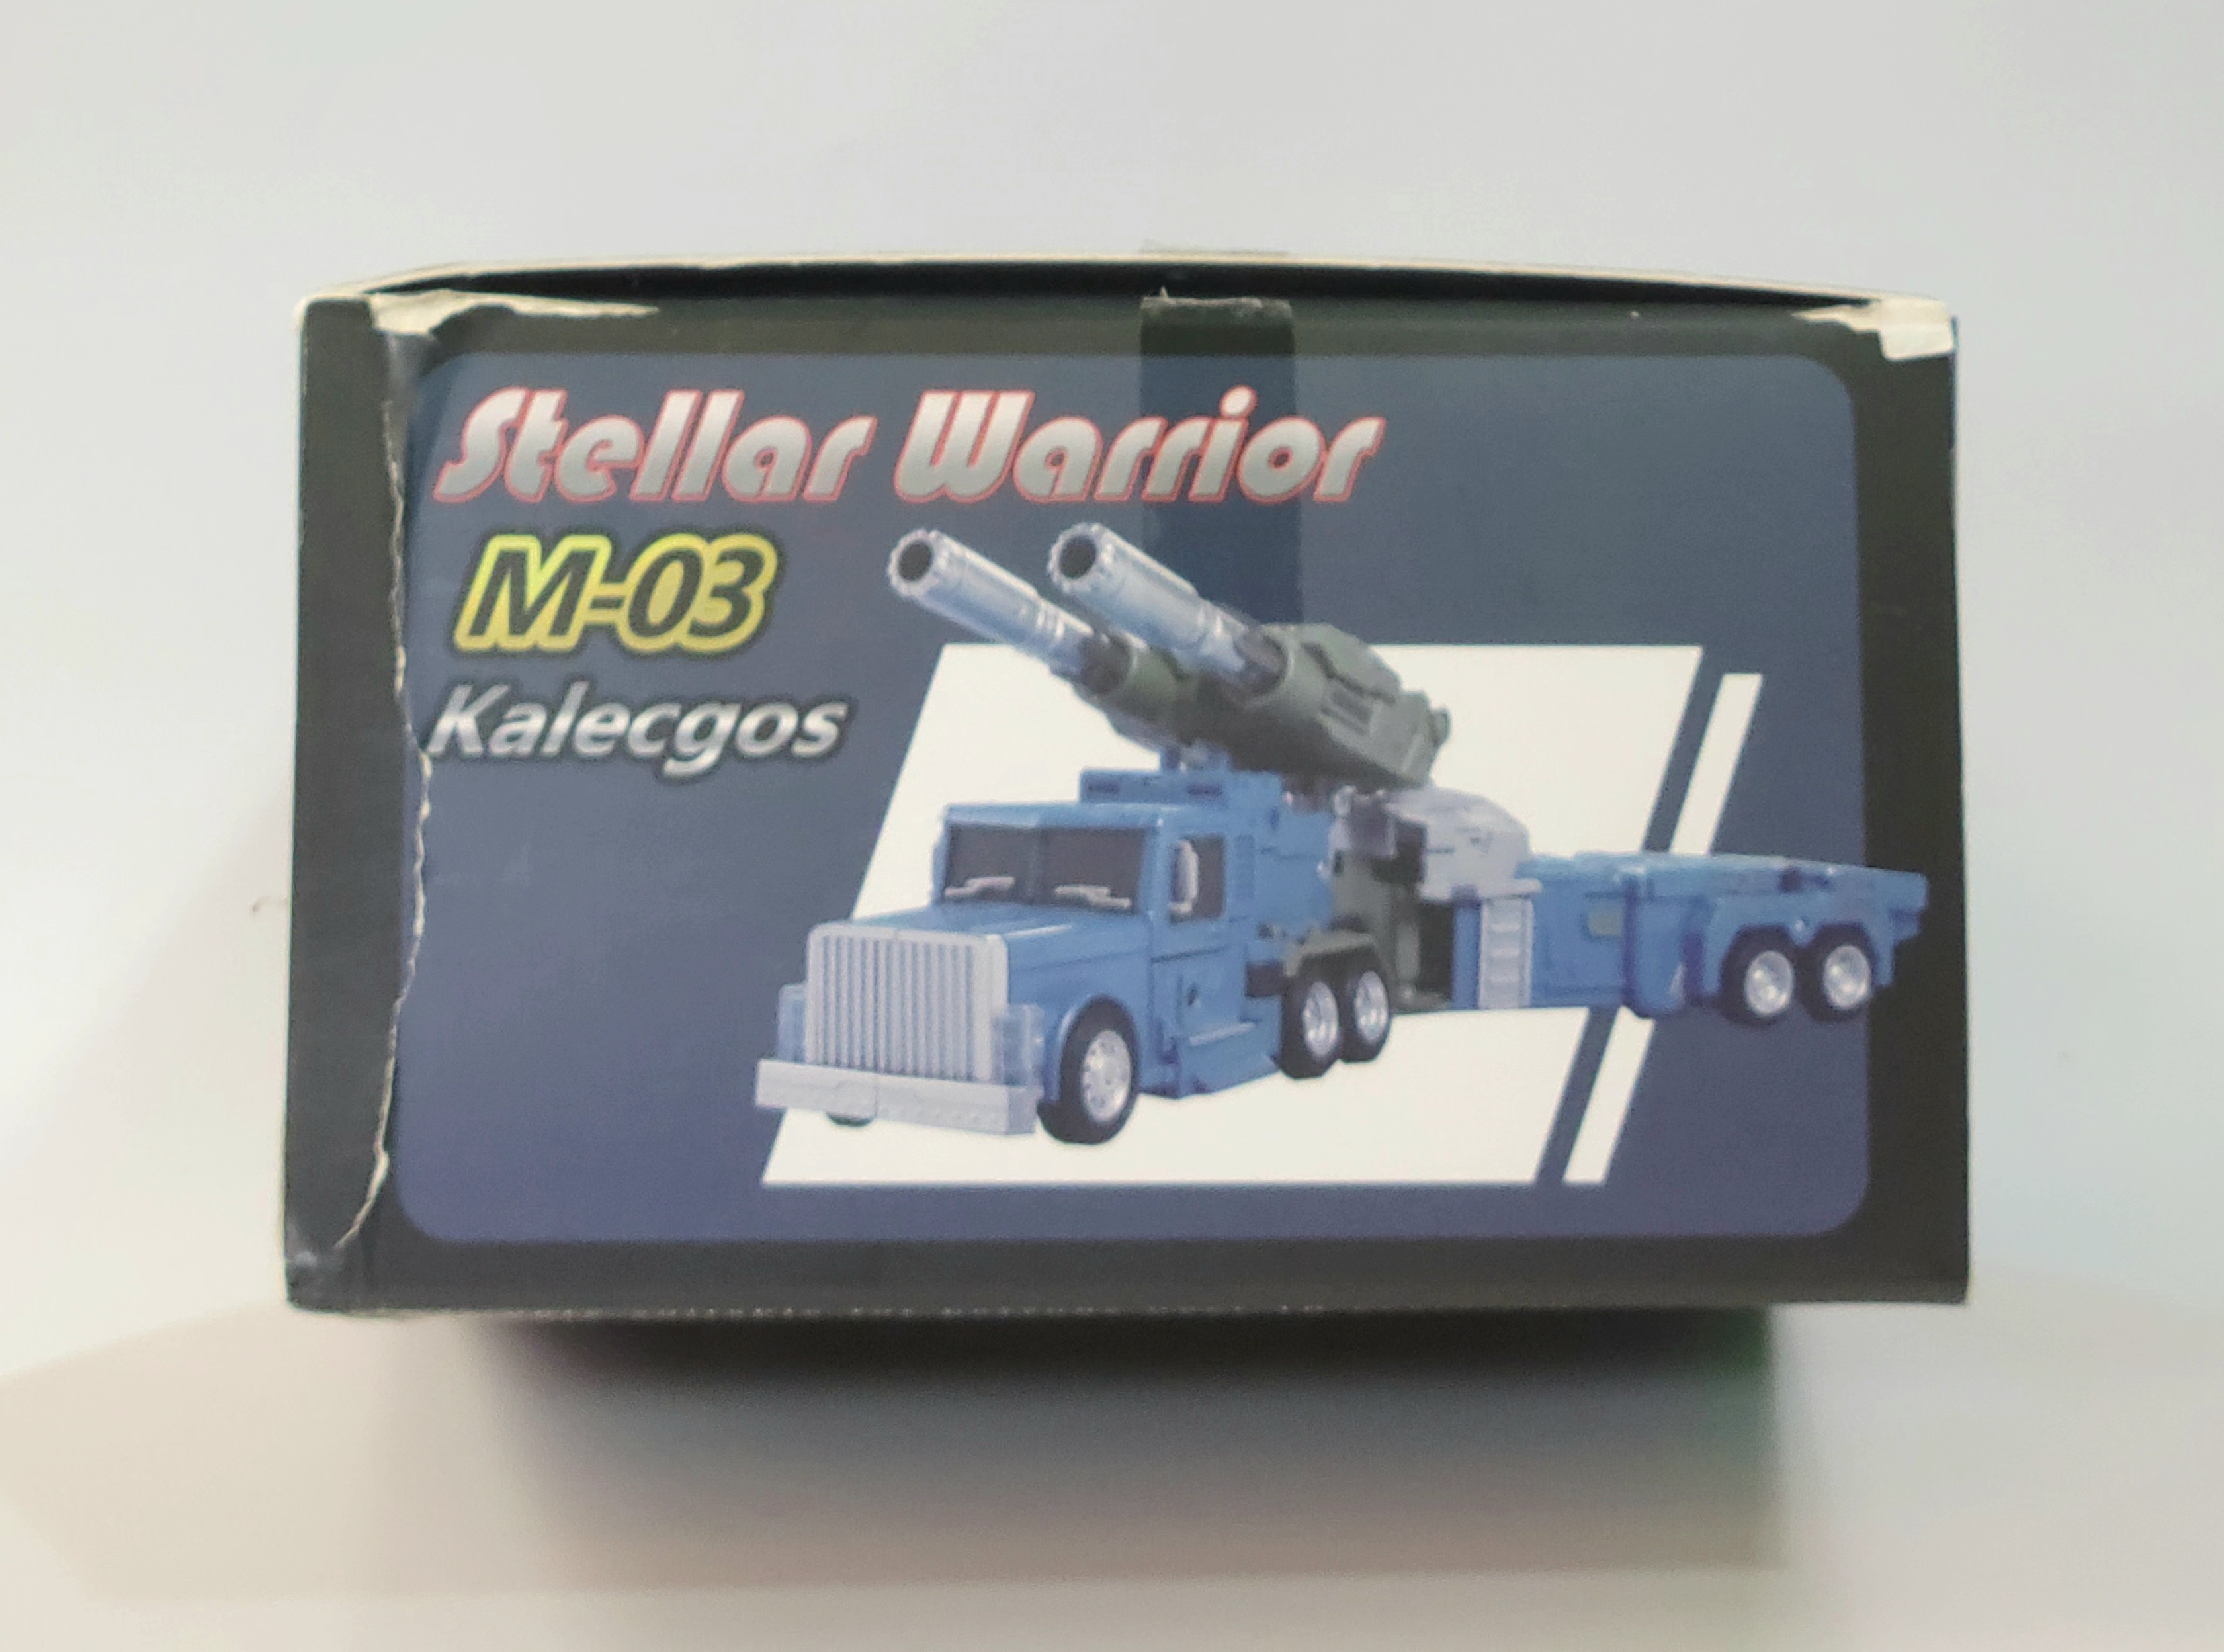 Unique Toys M 03 Kalegcos Stellar Warrior Onslaught BOX ONLY - NO FIGURE